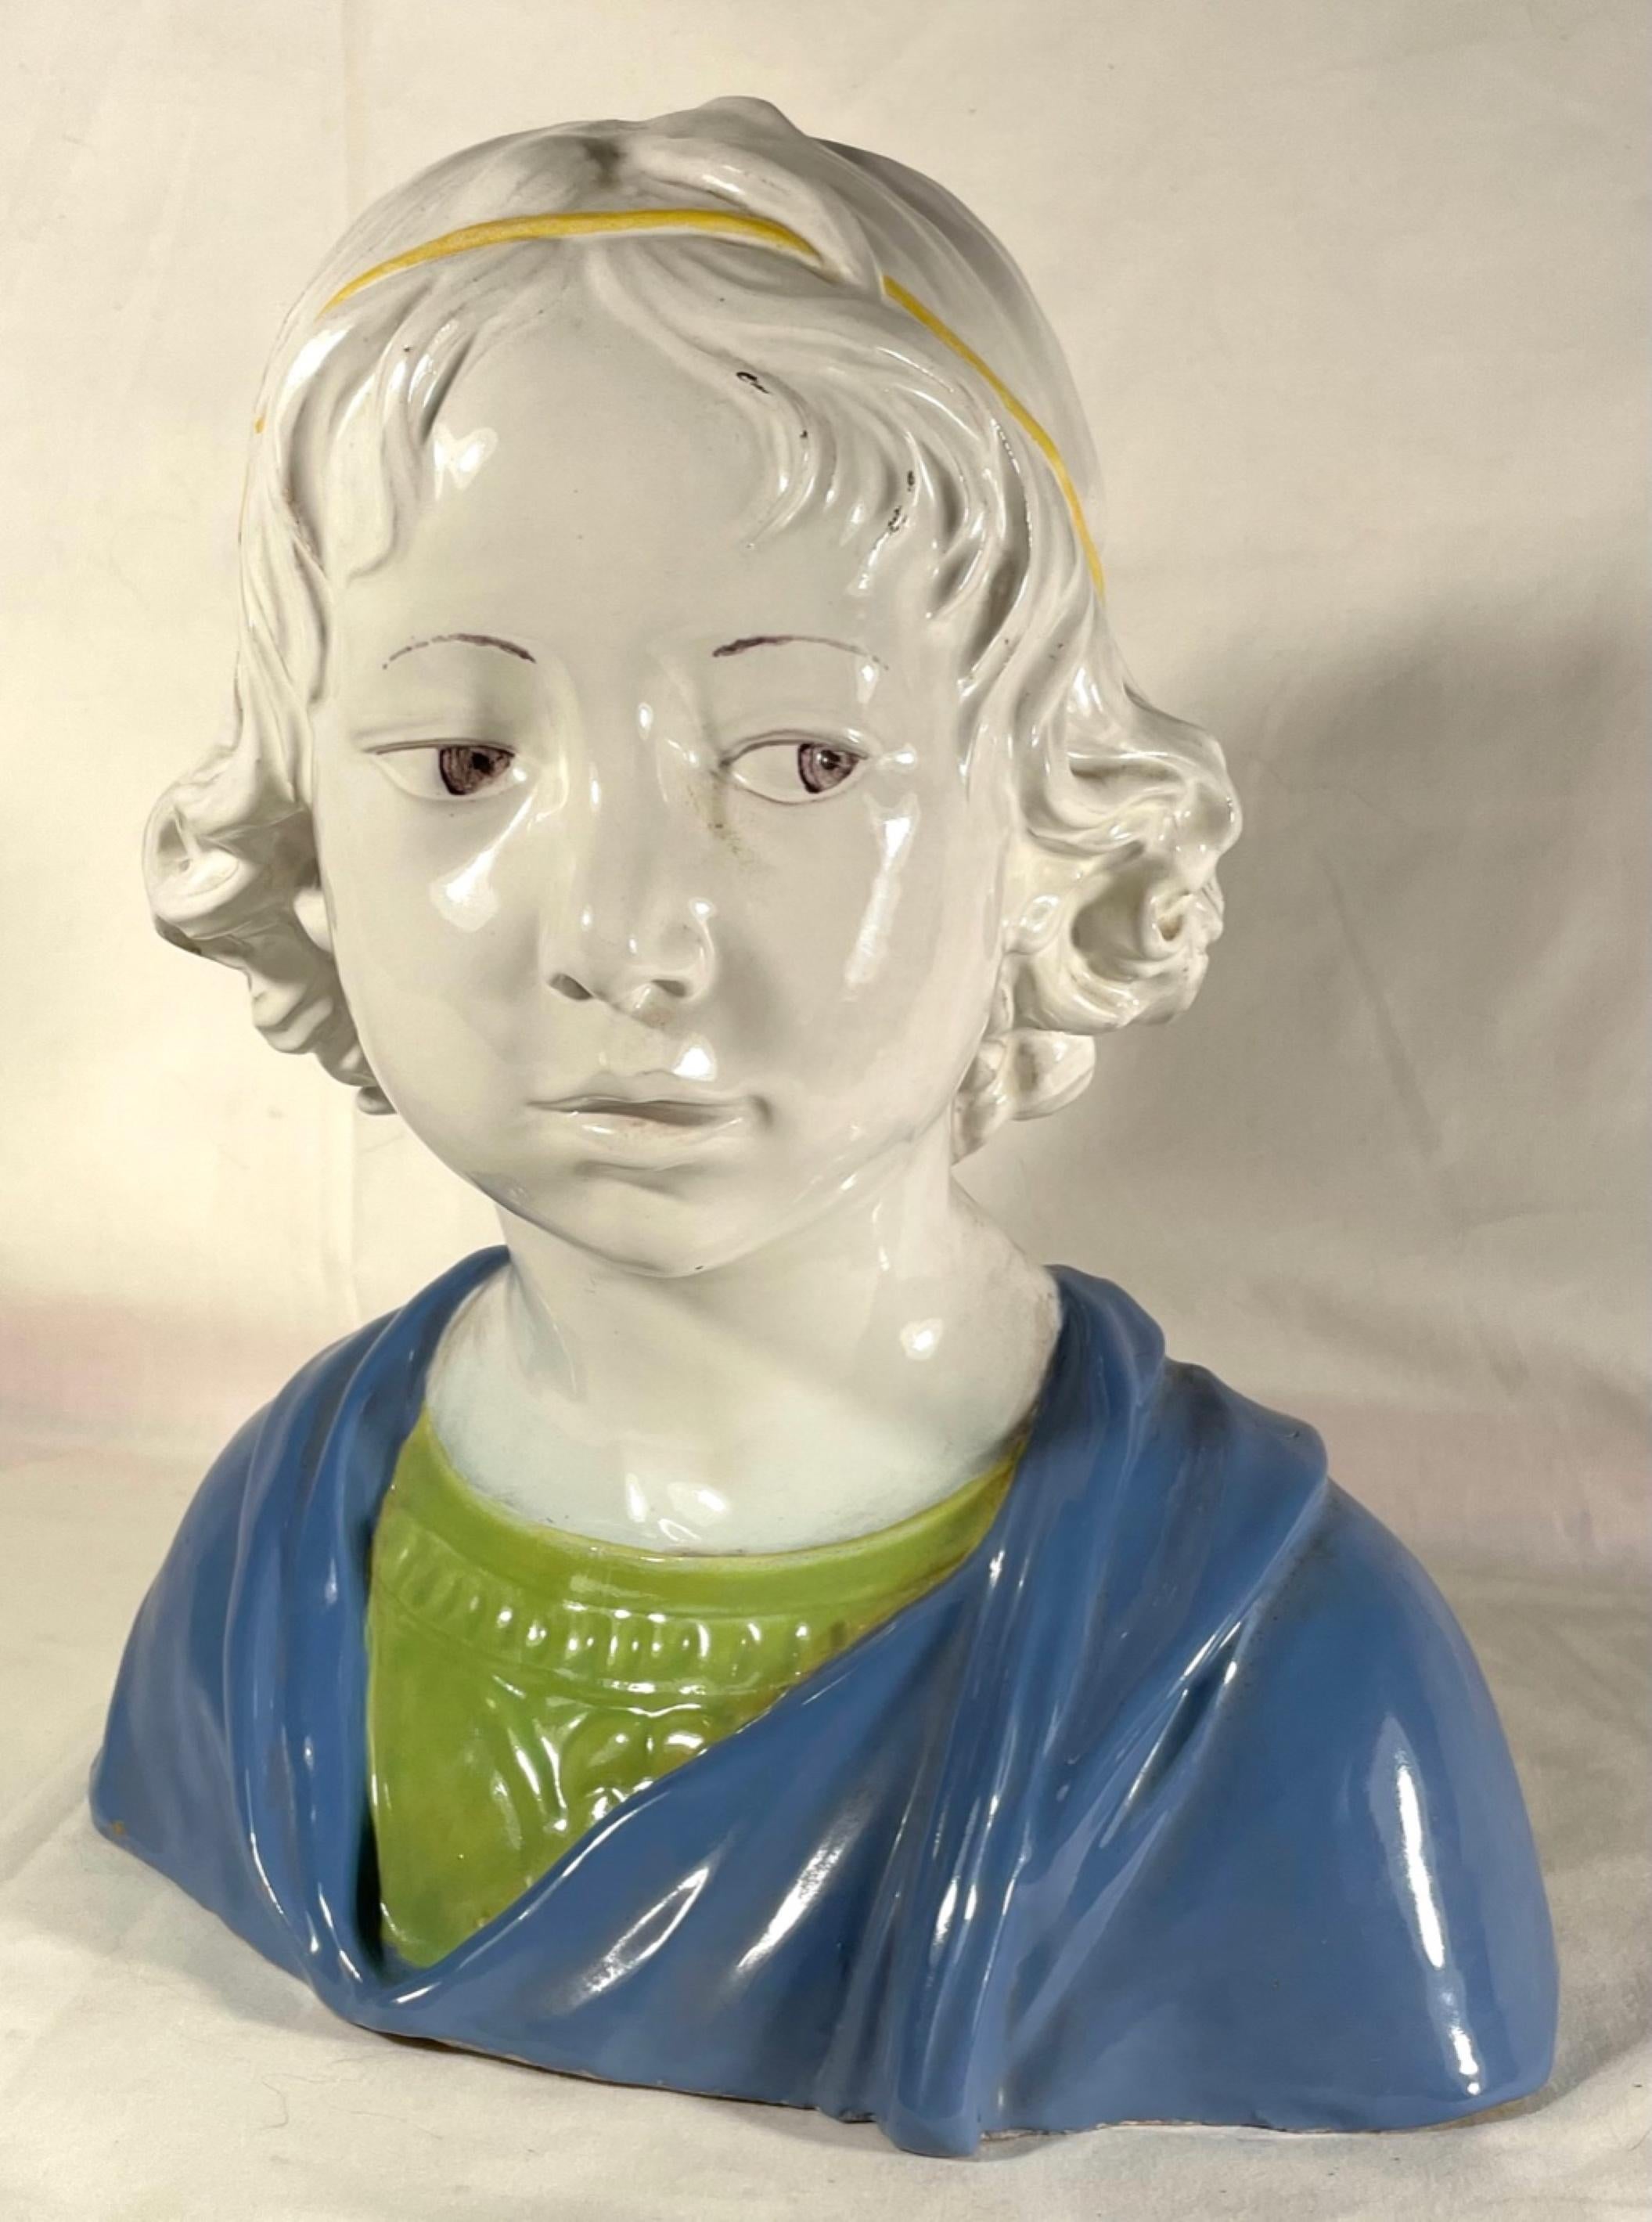 Vintage majolica bust of a young boy after Della Robbia

This glazed terracotta bust is after a work by Luca della Robbia, (1475-80) and was originally produced in Florence during the height of the Italian Renaissance. It is exhibited in the